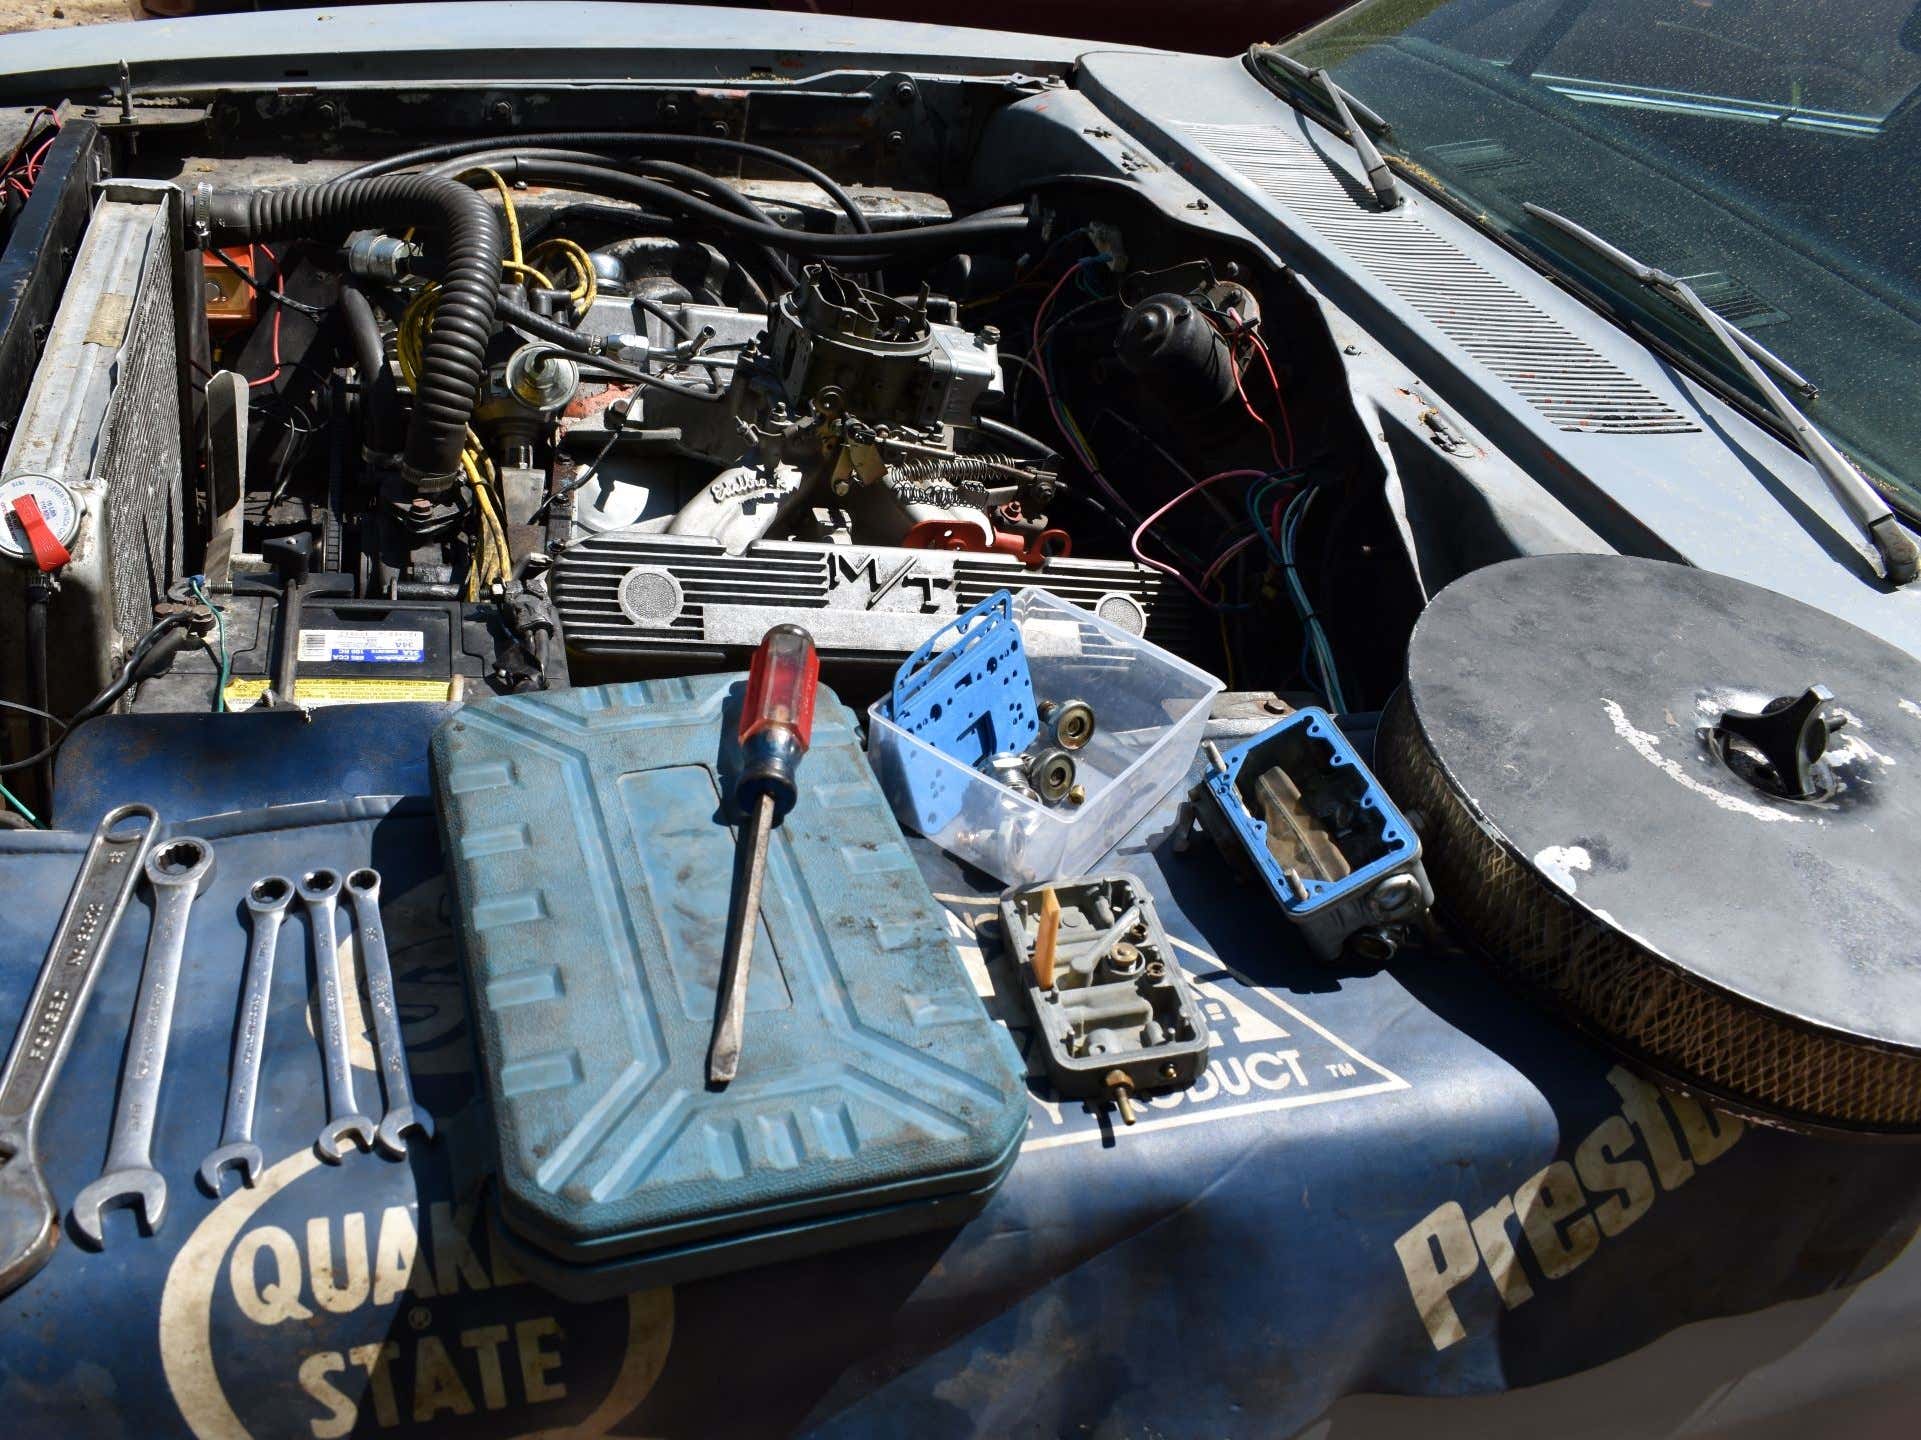 The engine and engine bay of a 1969 Dodge Charger with a Holley carburetor.